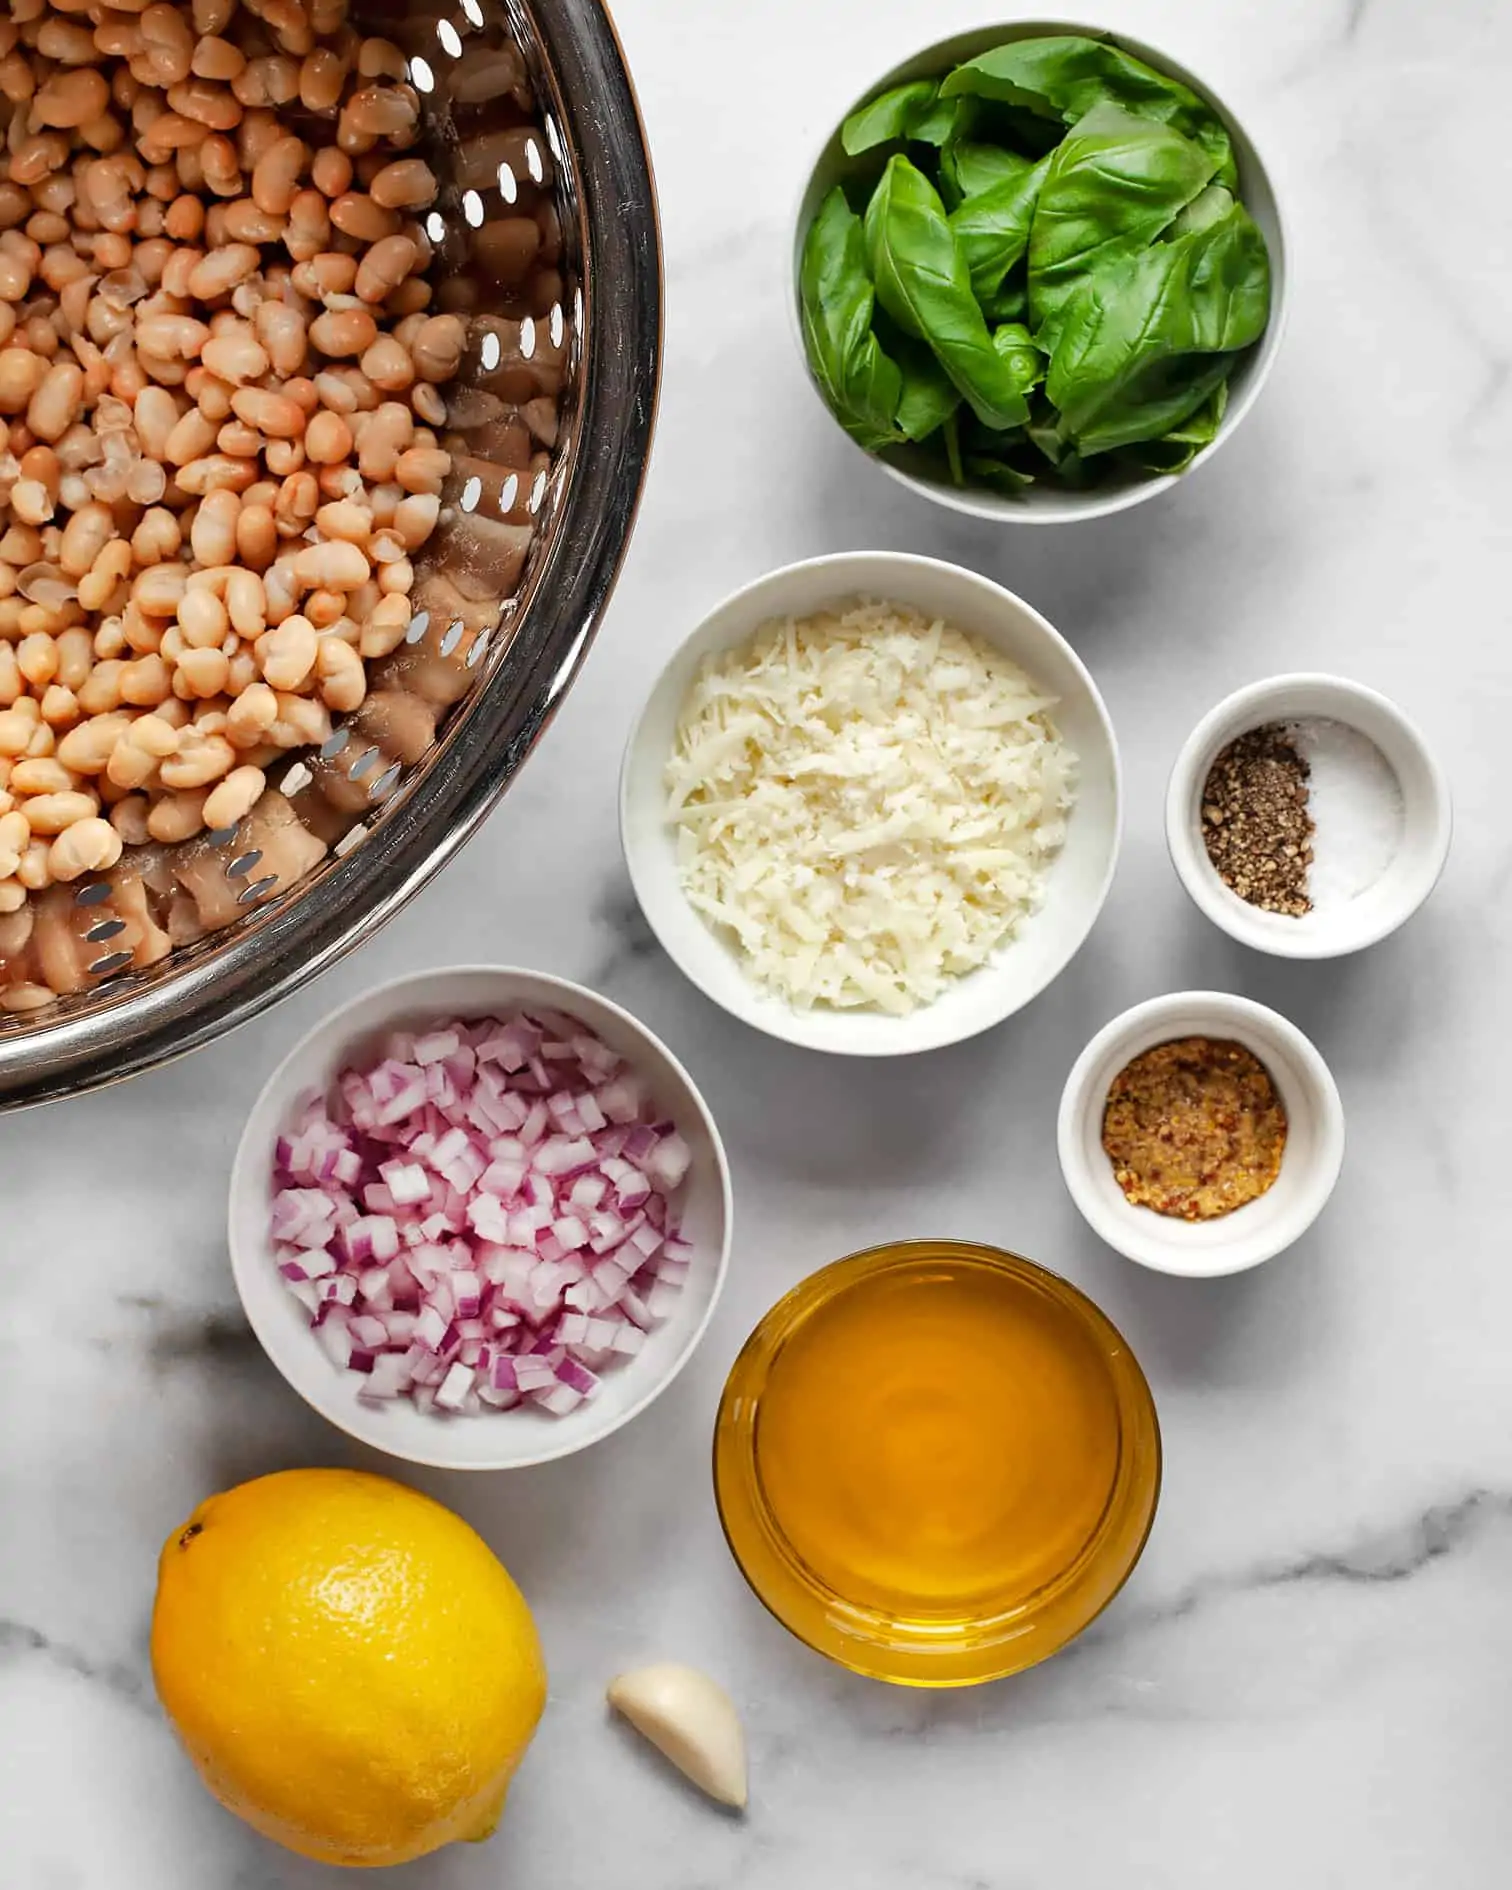 Ingredients including white beans, red onions, pecorino cheese, basil, olive oil and lemon.